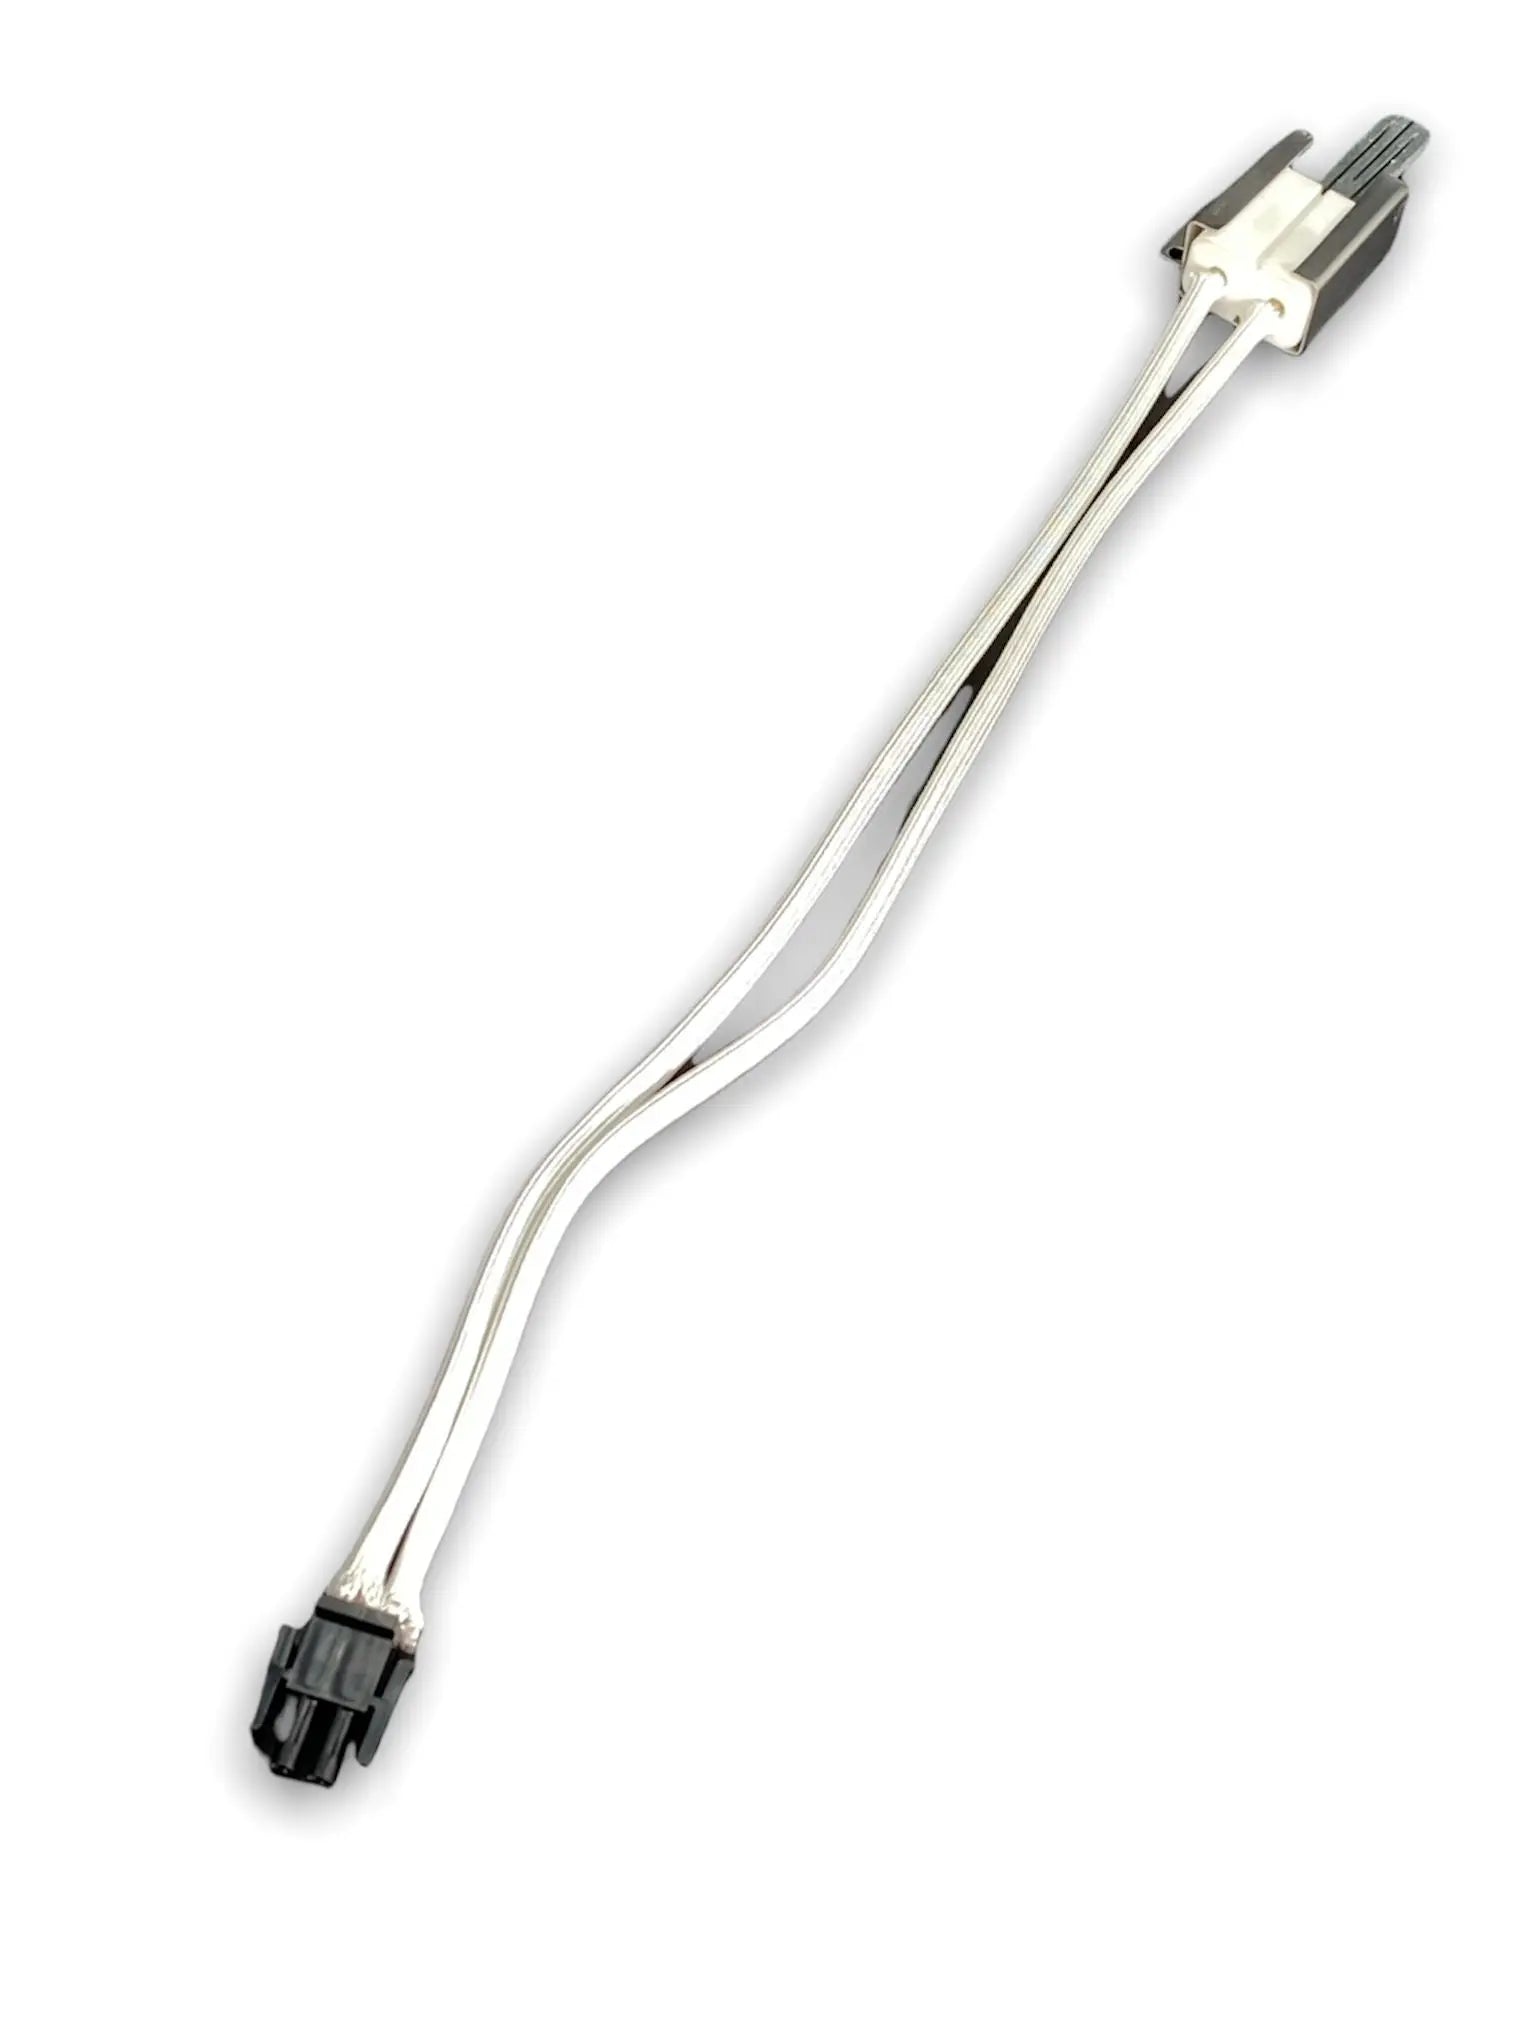 GE Range Flat Gas Igniter, Hot Surface - WB28X20446 , REPLACES: 3026526 AP5791227 PS8754784 EAP8754784 PD00045625 INVERTEC